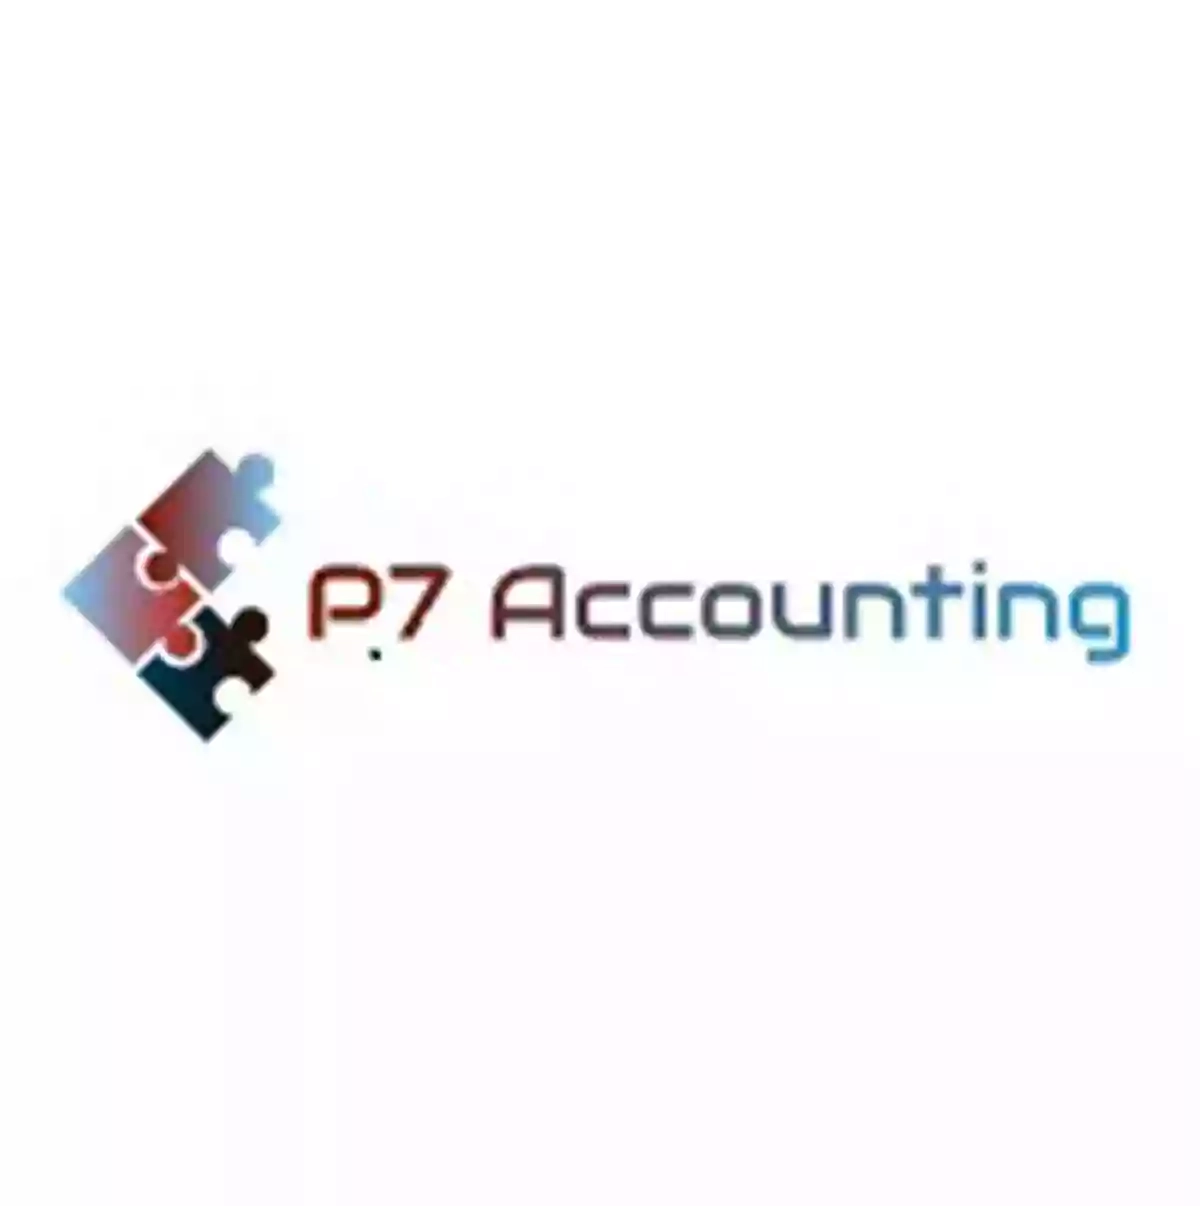 P7 Accounting Limited